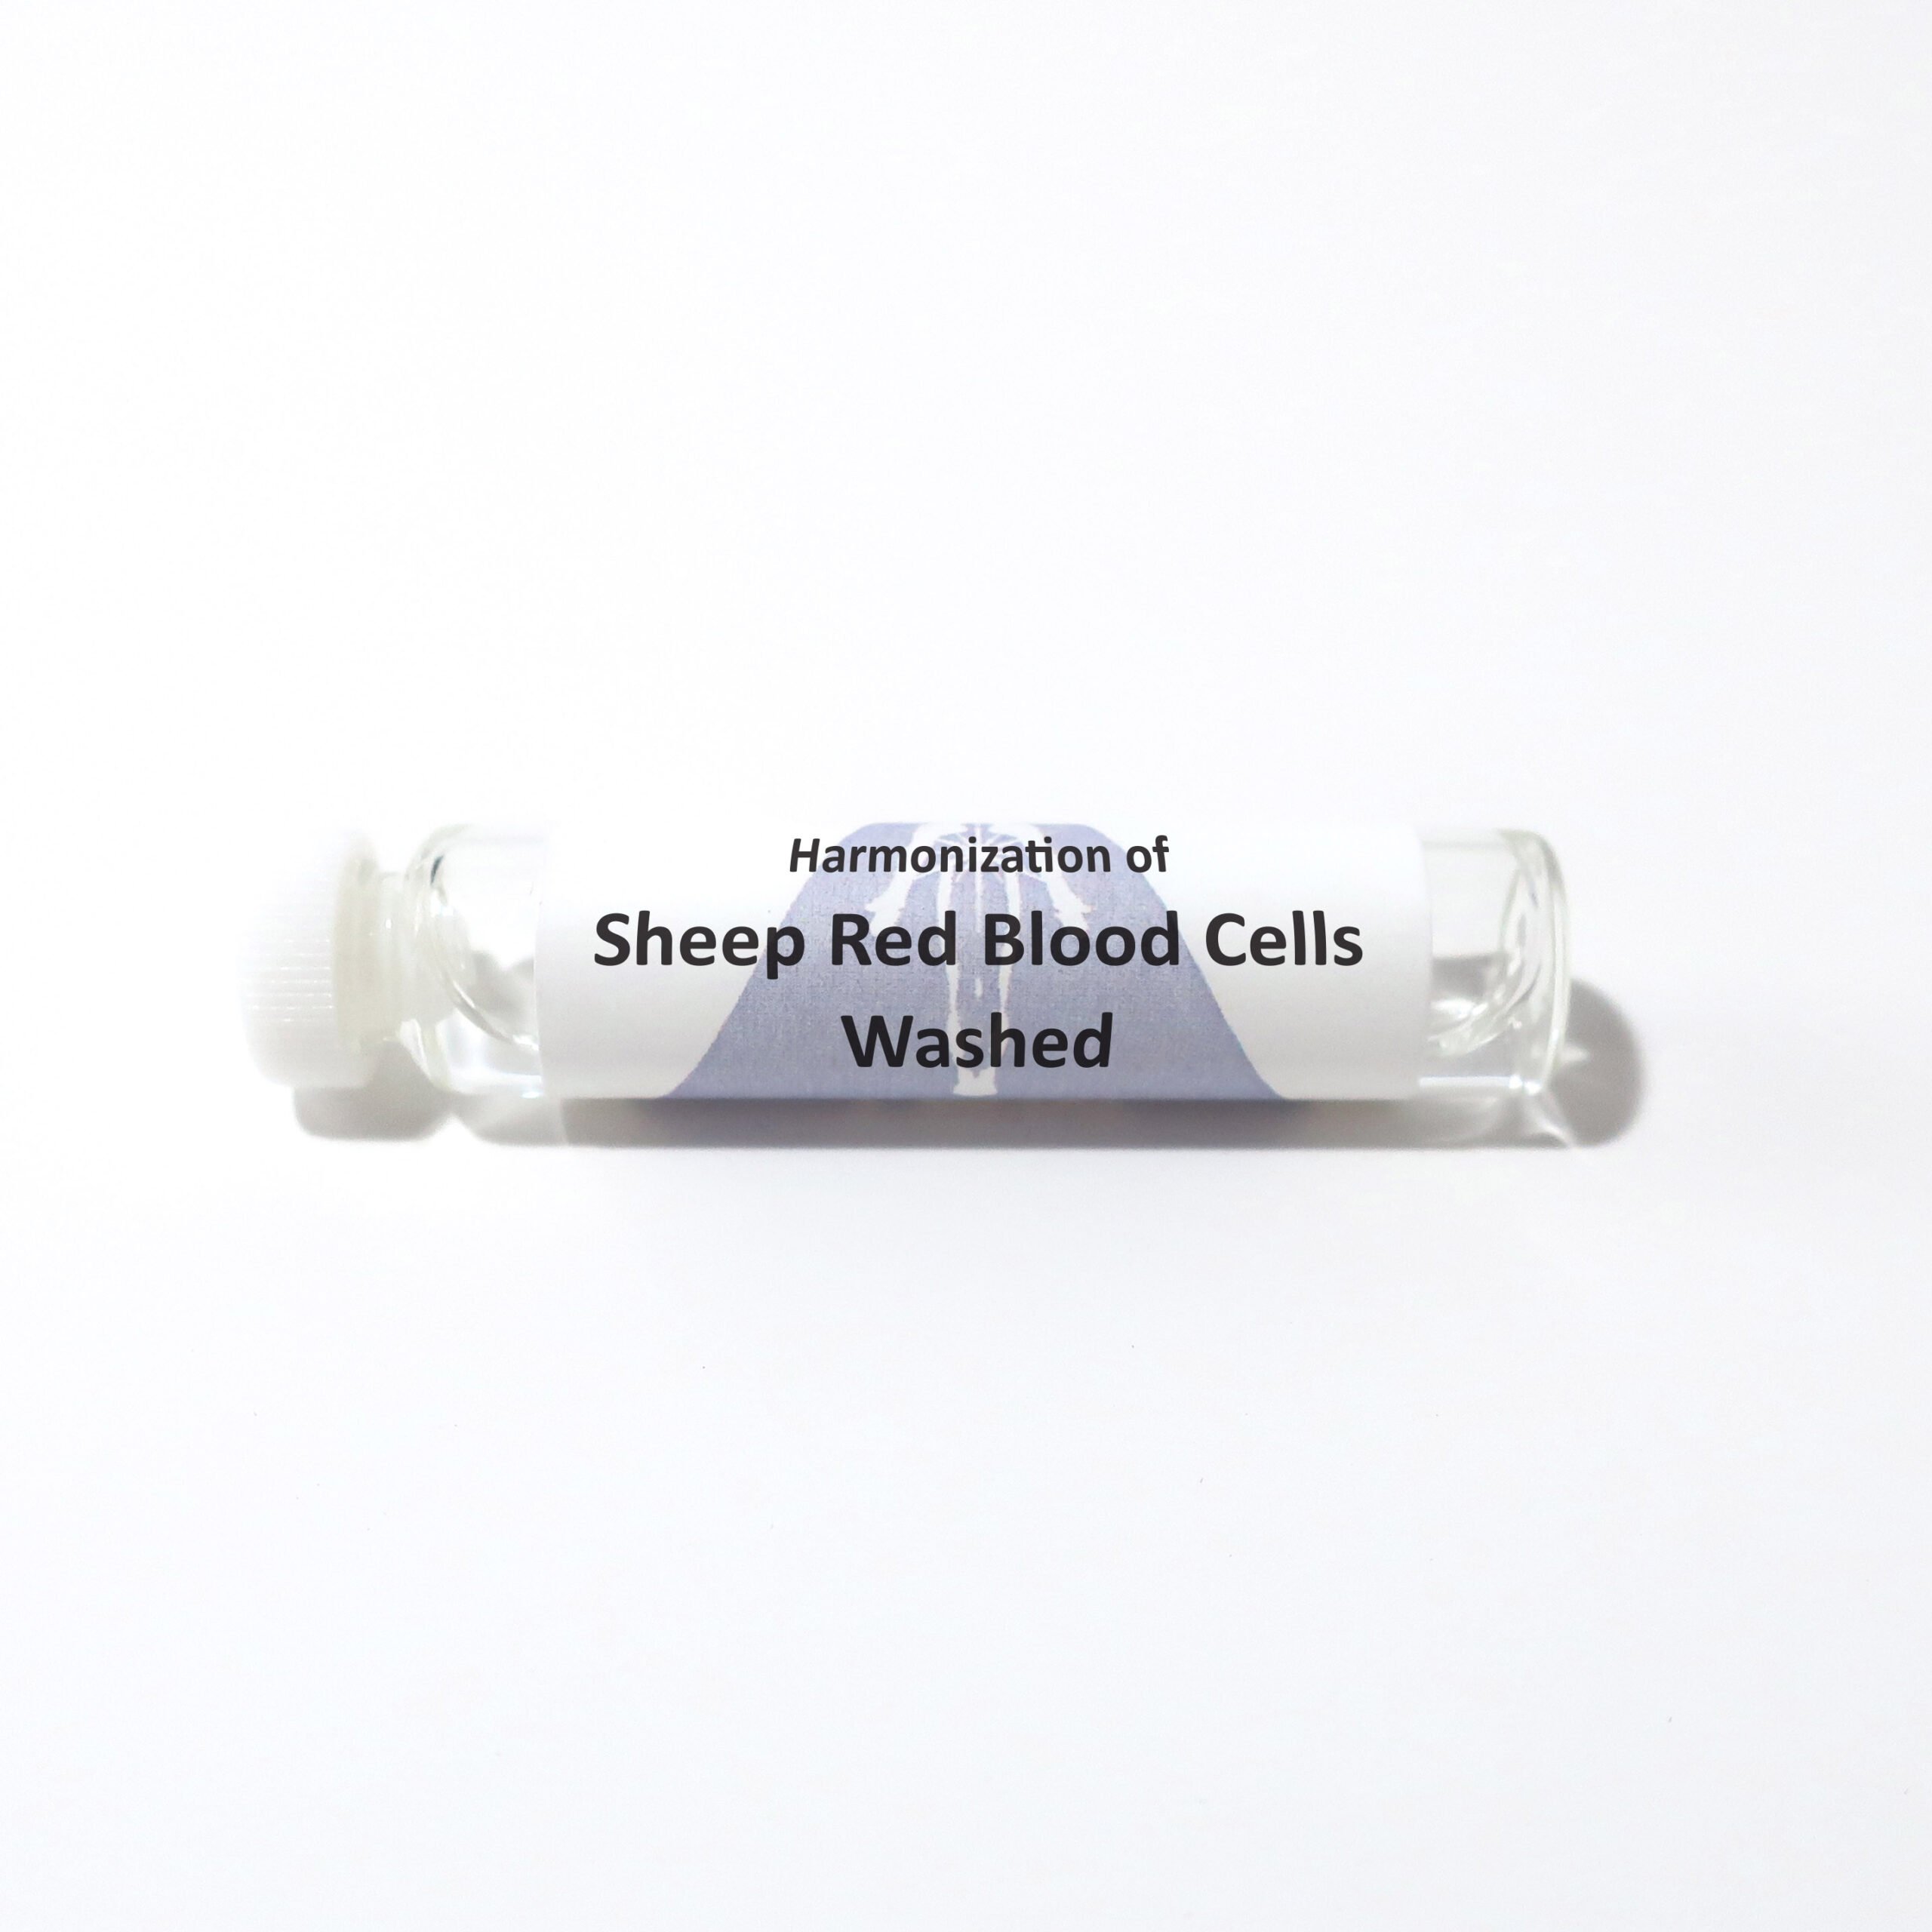 Sheep Red Blood Cells, Washed